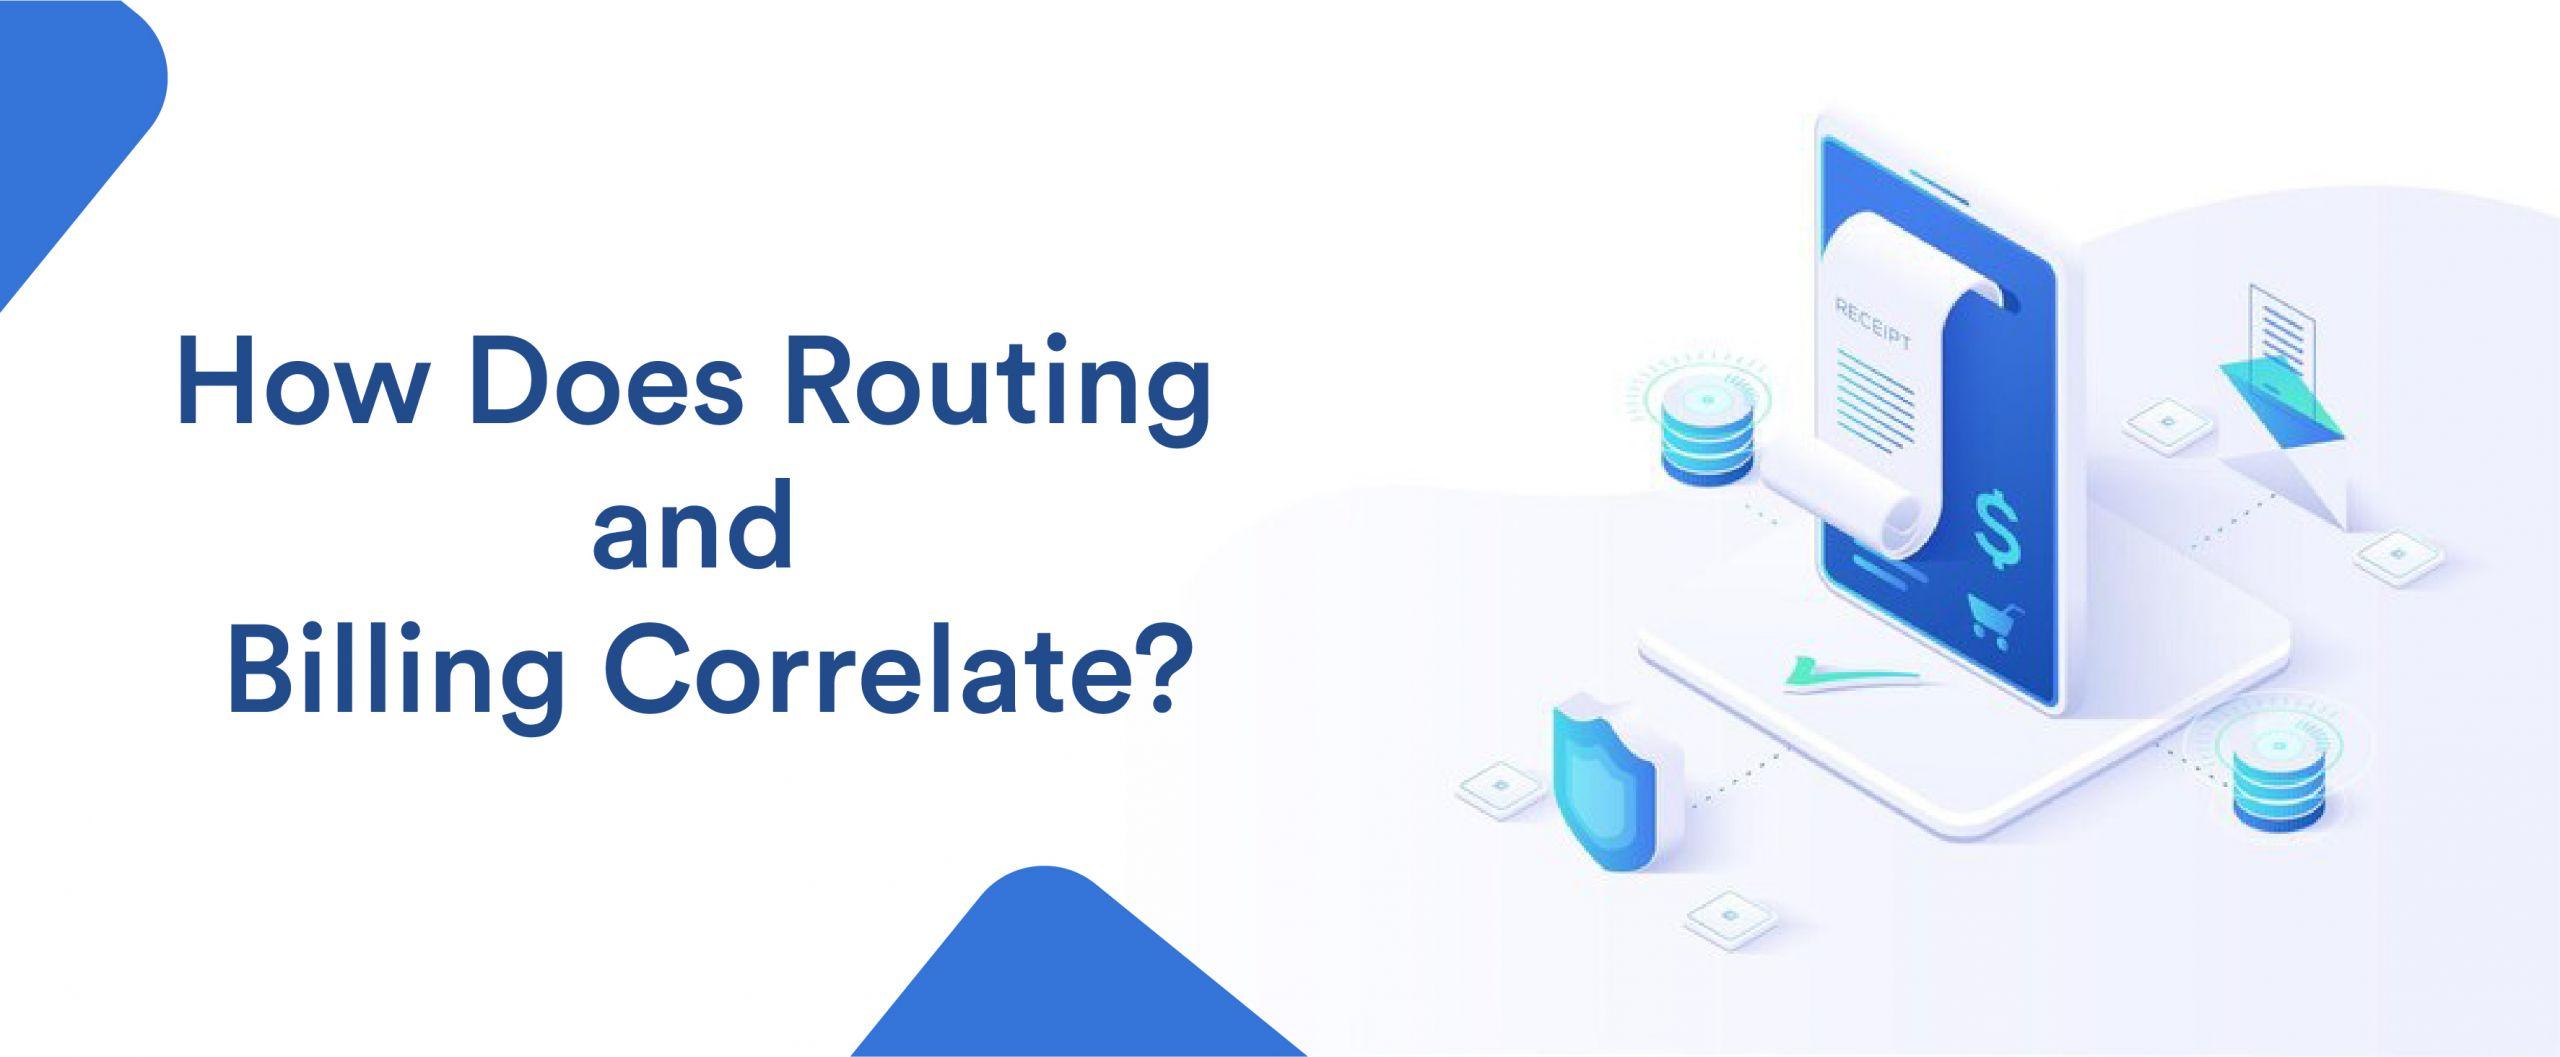 How Does Routing and Billing Correlate?